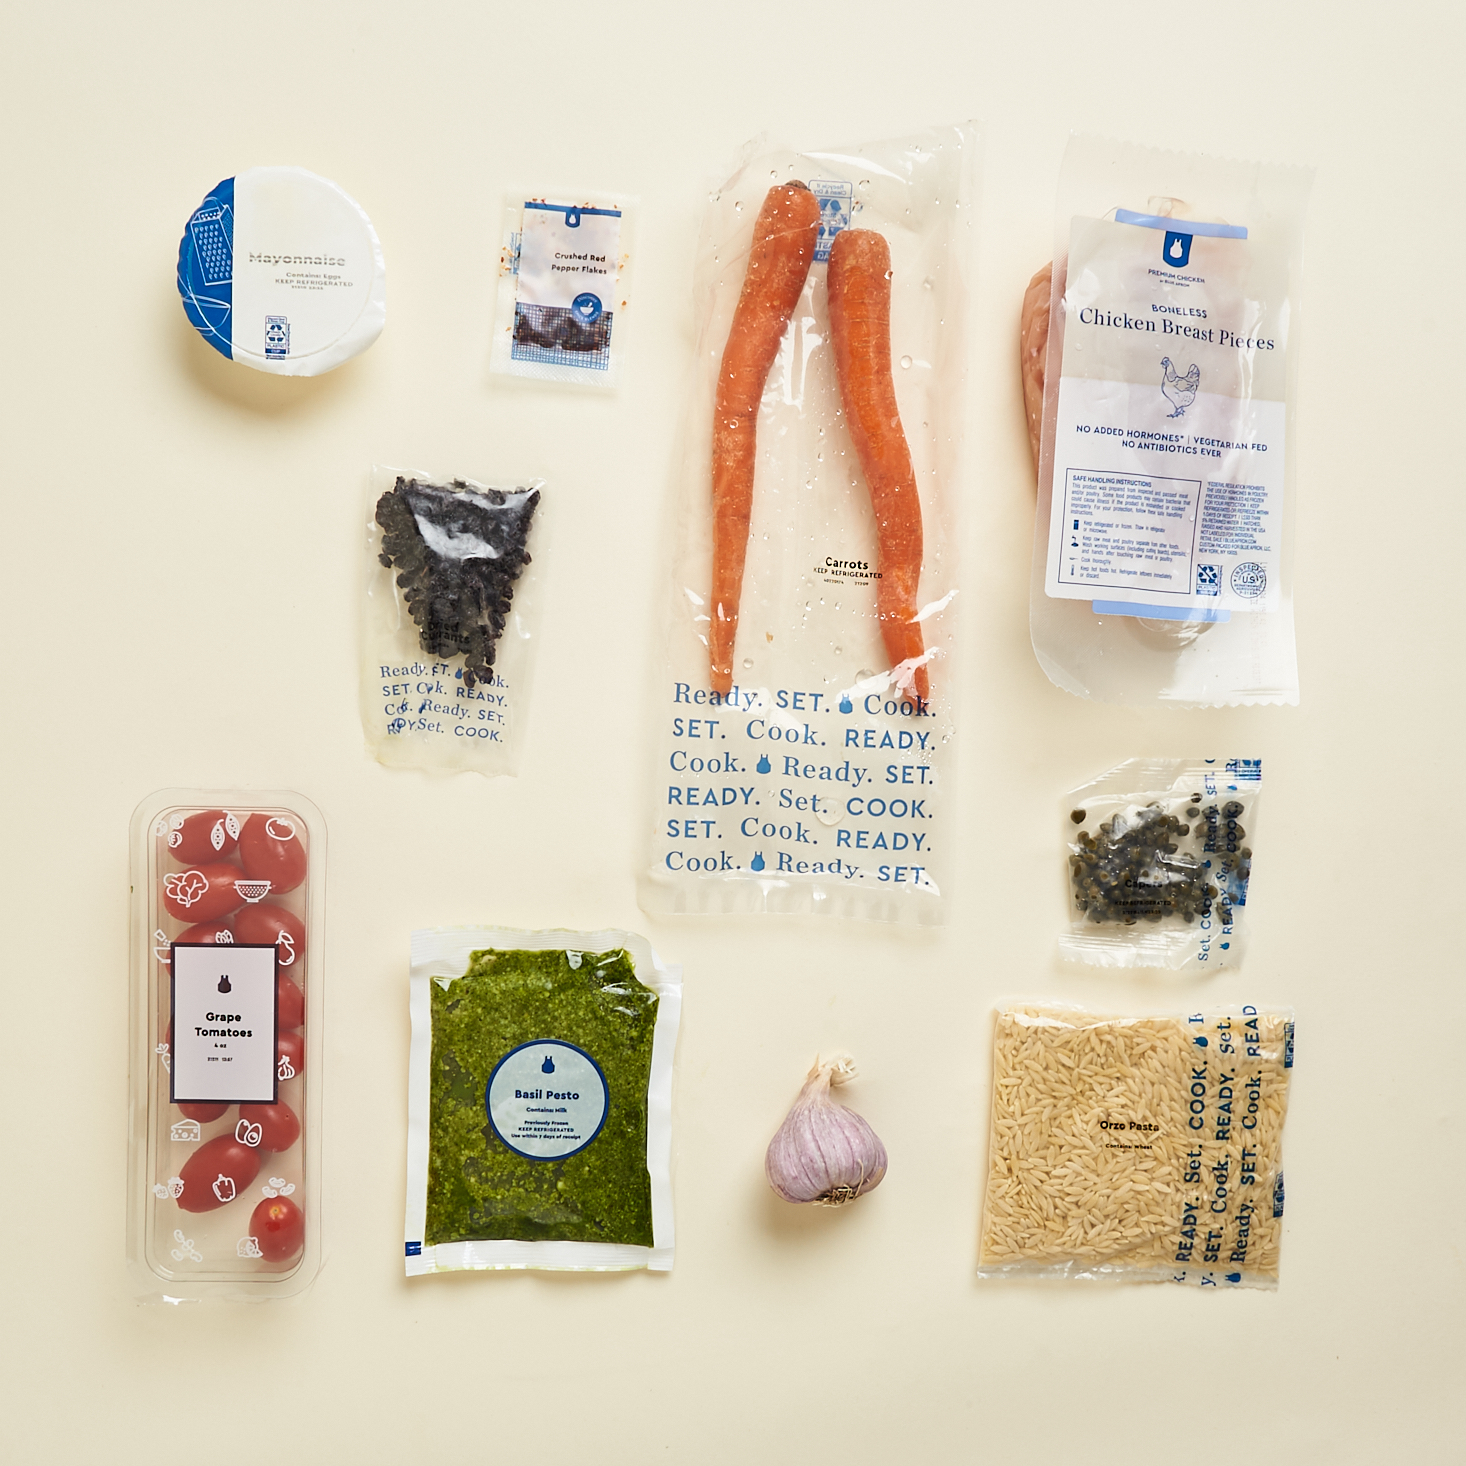 Blue Apron unlocks access to meal kits in Walmart collaboration